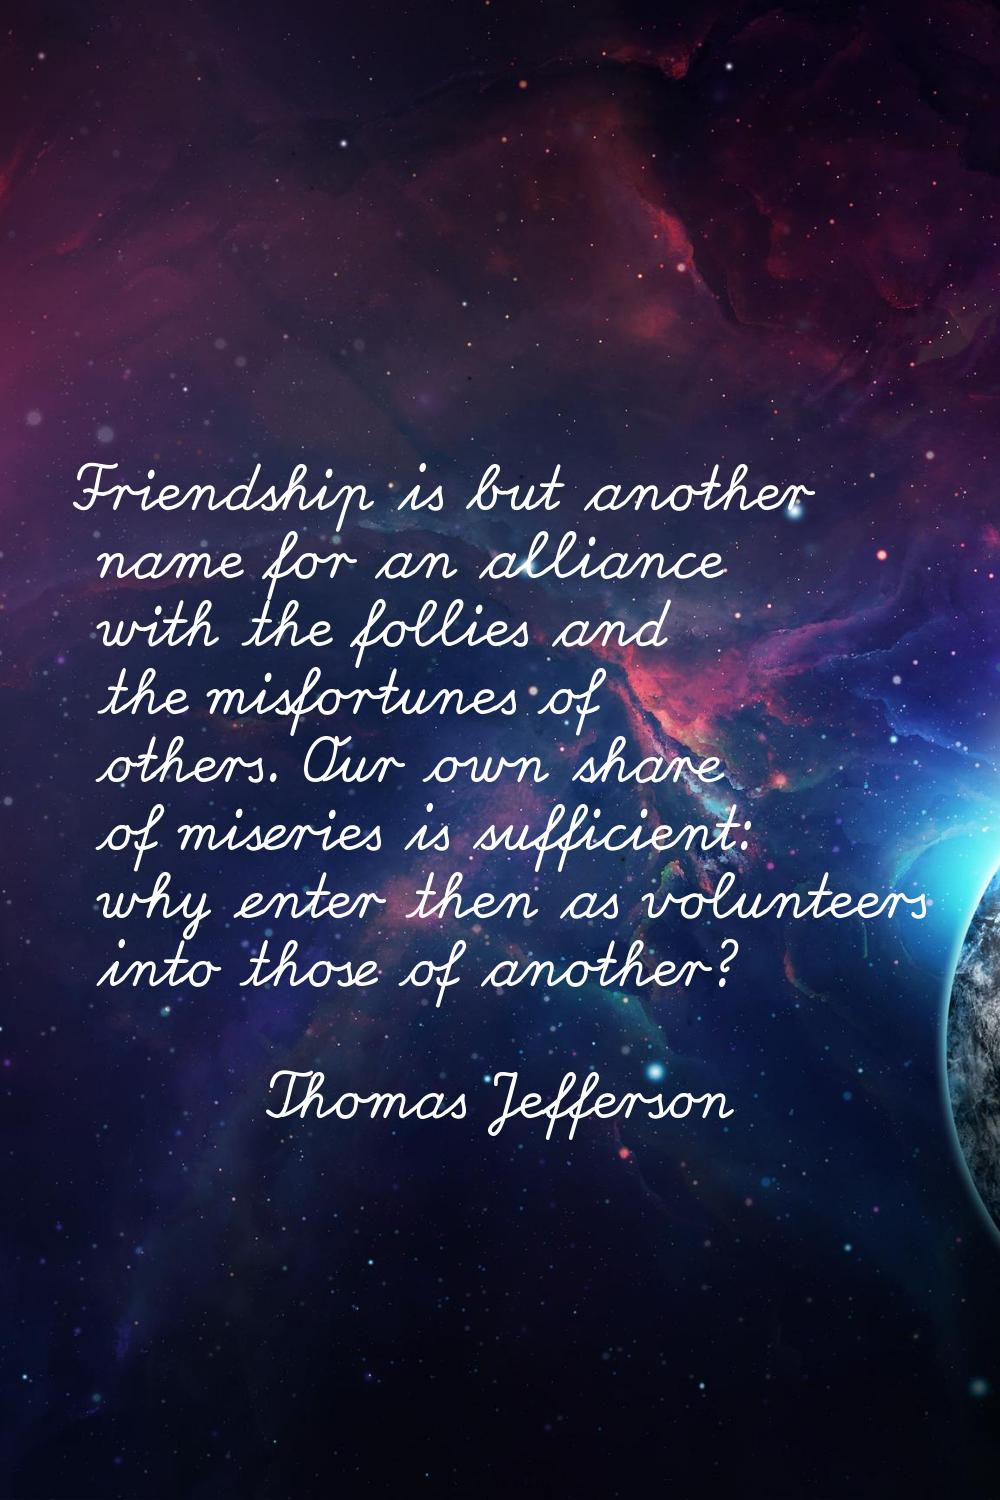 Friendship is but another name for an alliance with the follies and the misfortunes of others. Our 